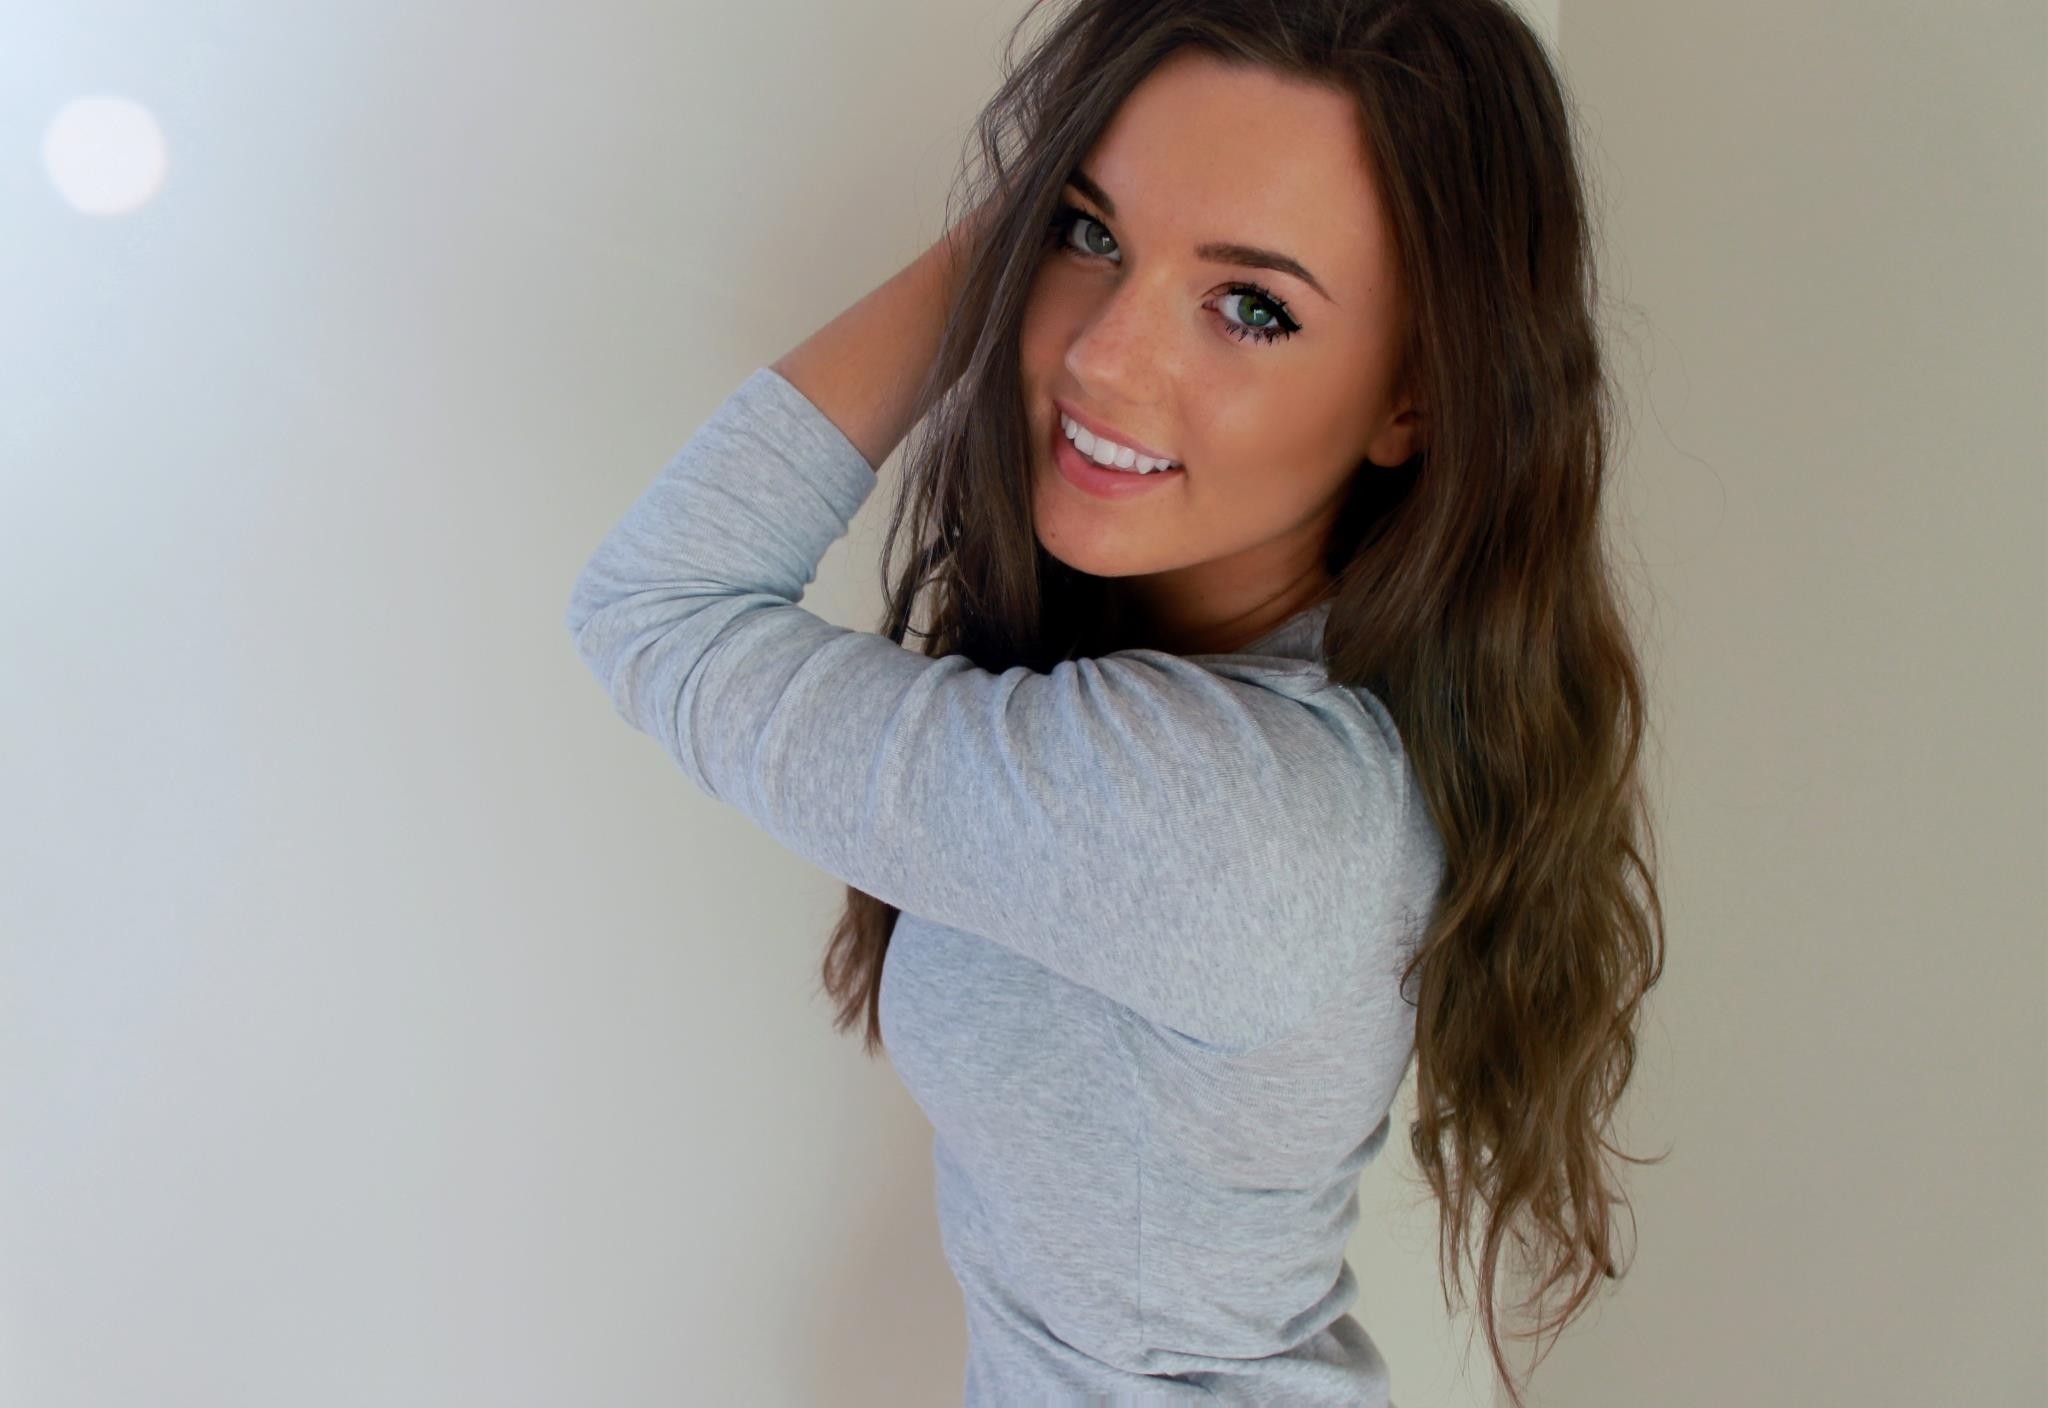 Model smiling against a gray wall